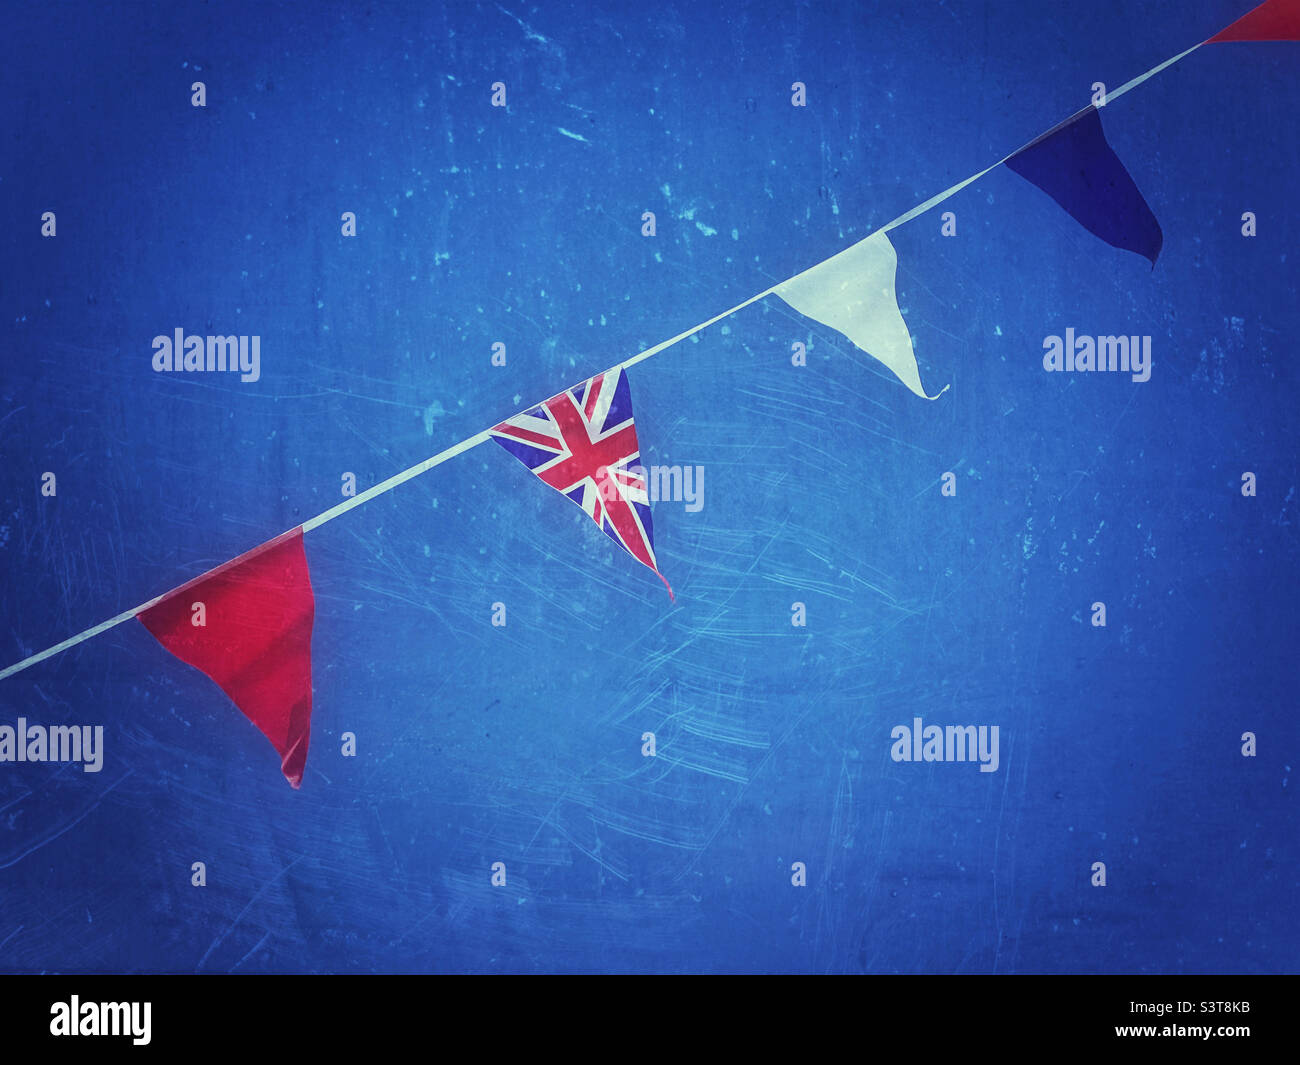 A retro effect image of Union Jack bunting, flapping in an English blue sky. This bunting was to celebrate the Queens Platinum Jubilee in June 2022. Photo ©️ COLIN HOSKINS. Stock Photo